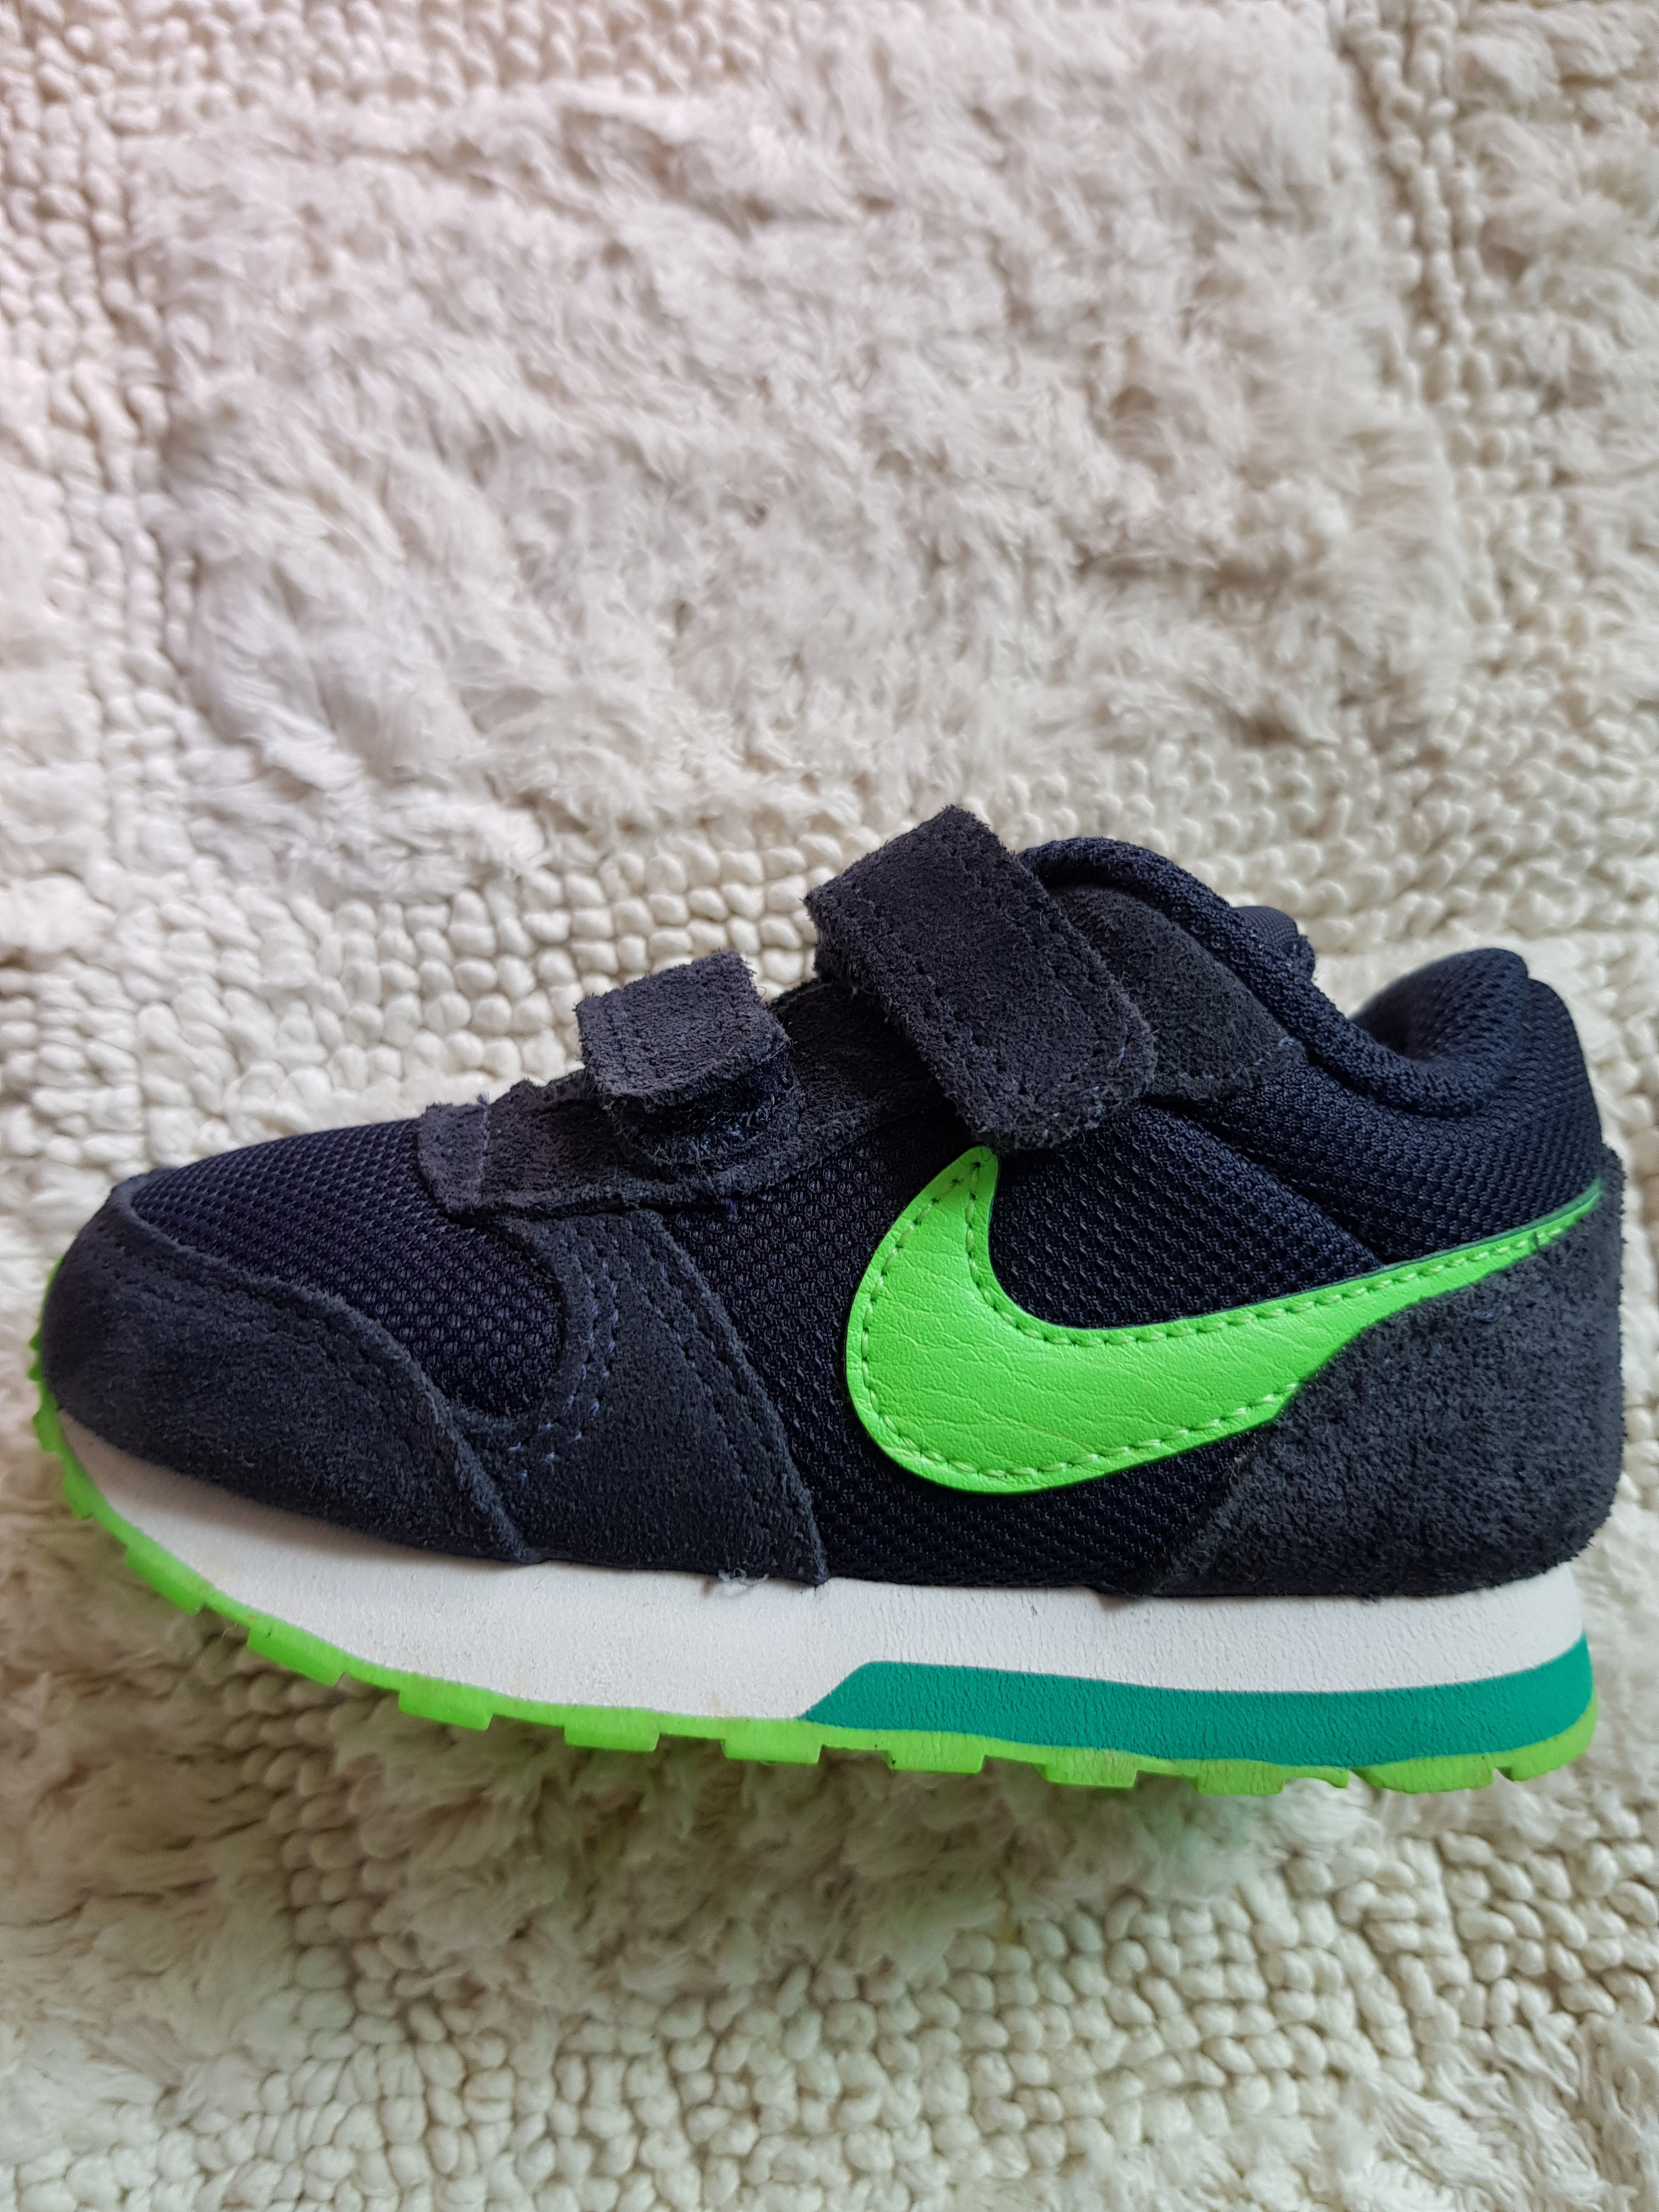 new nike shoes for boys